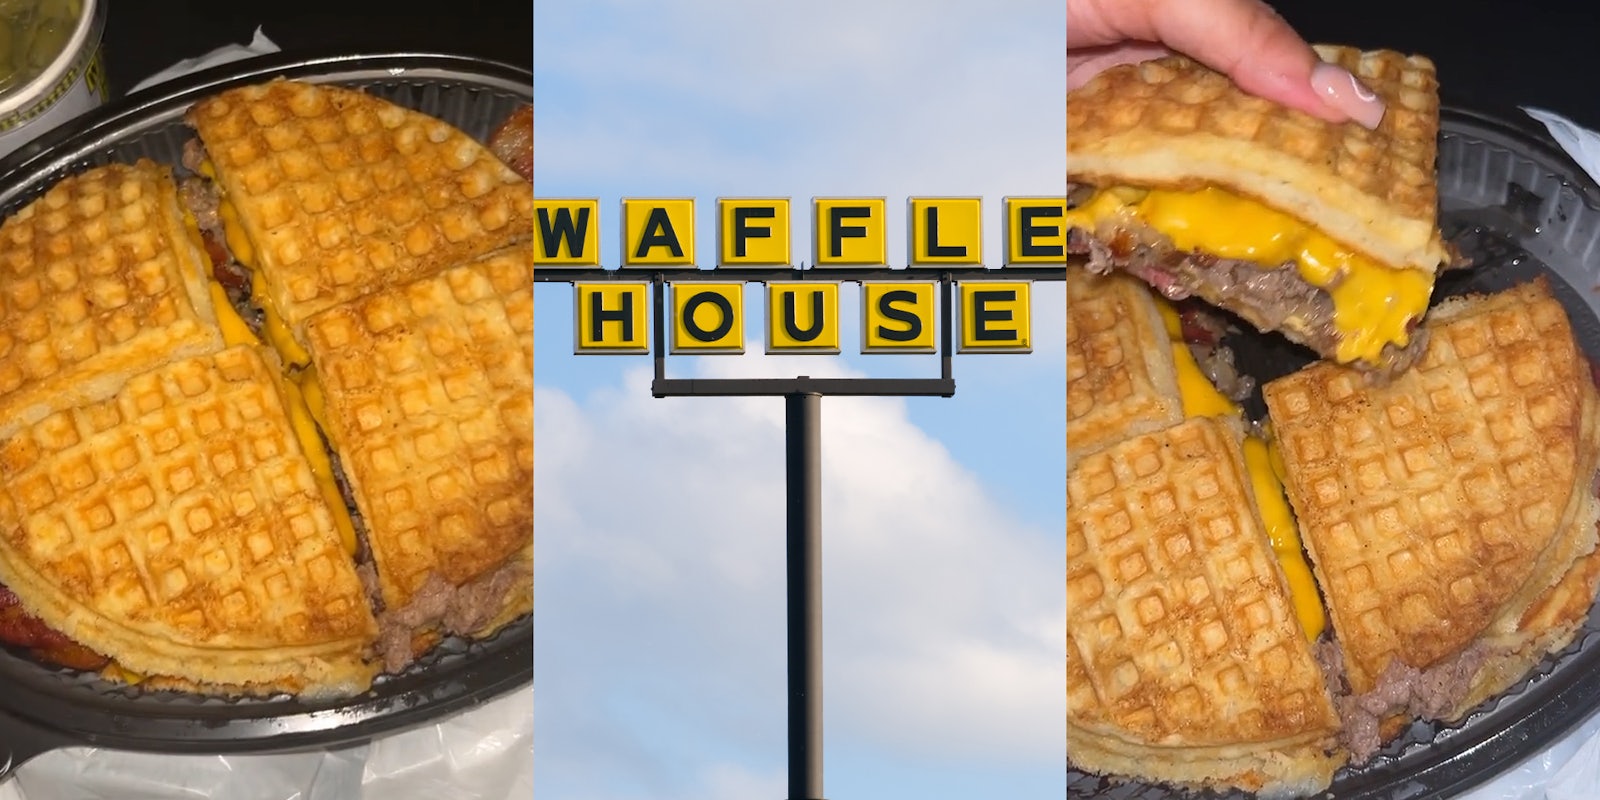 Waffle House waffle burger in black container (l) Waffle House sign in front of blue sky (c) Waffle House waffle burger slice in hand (r)